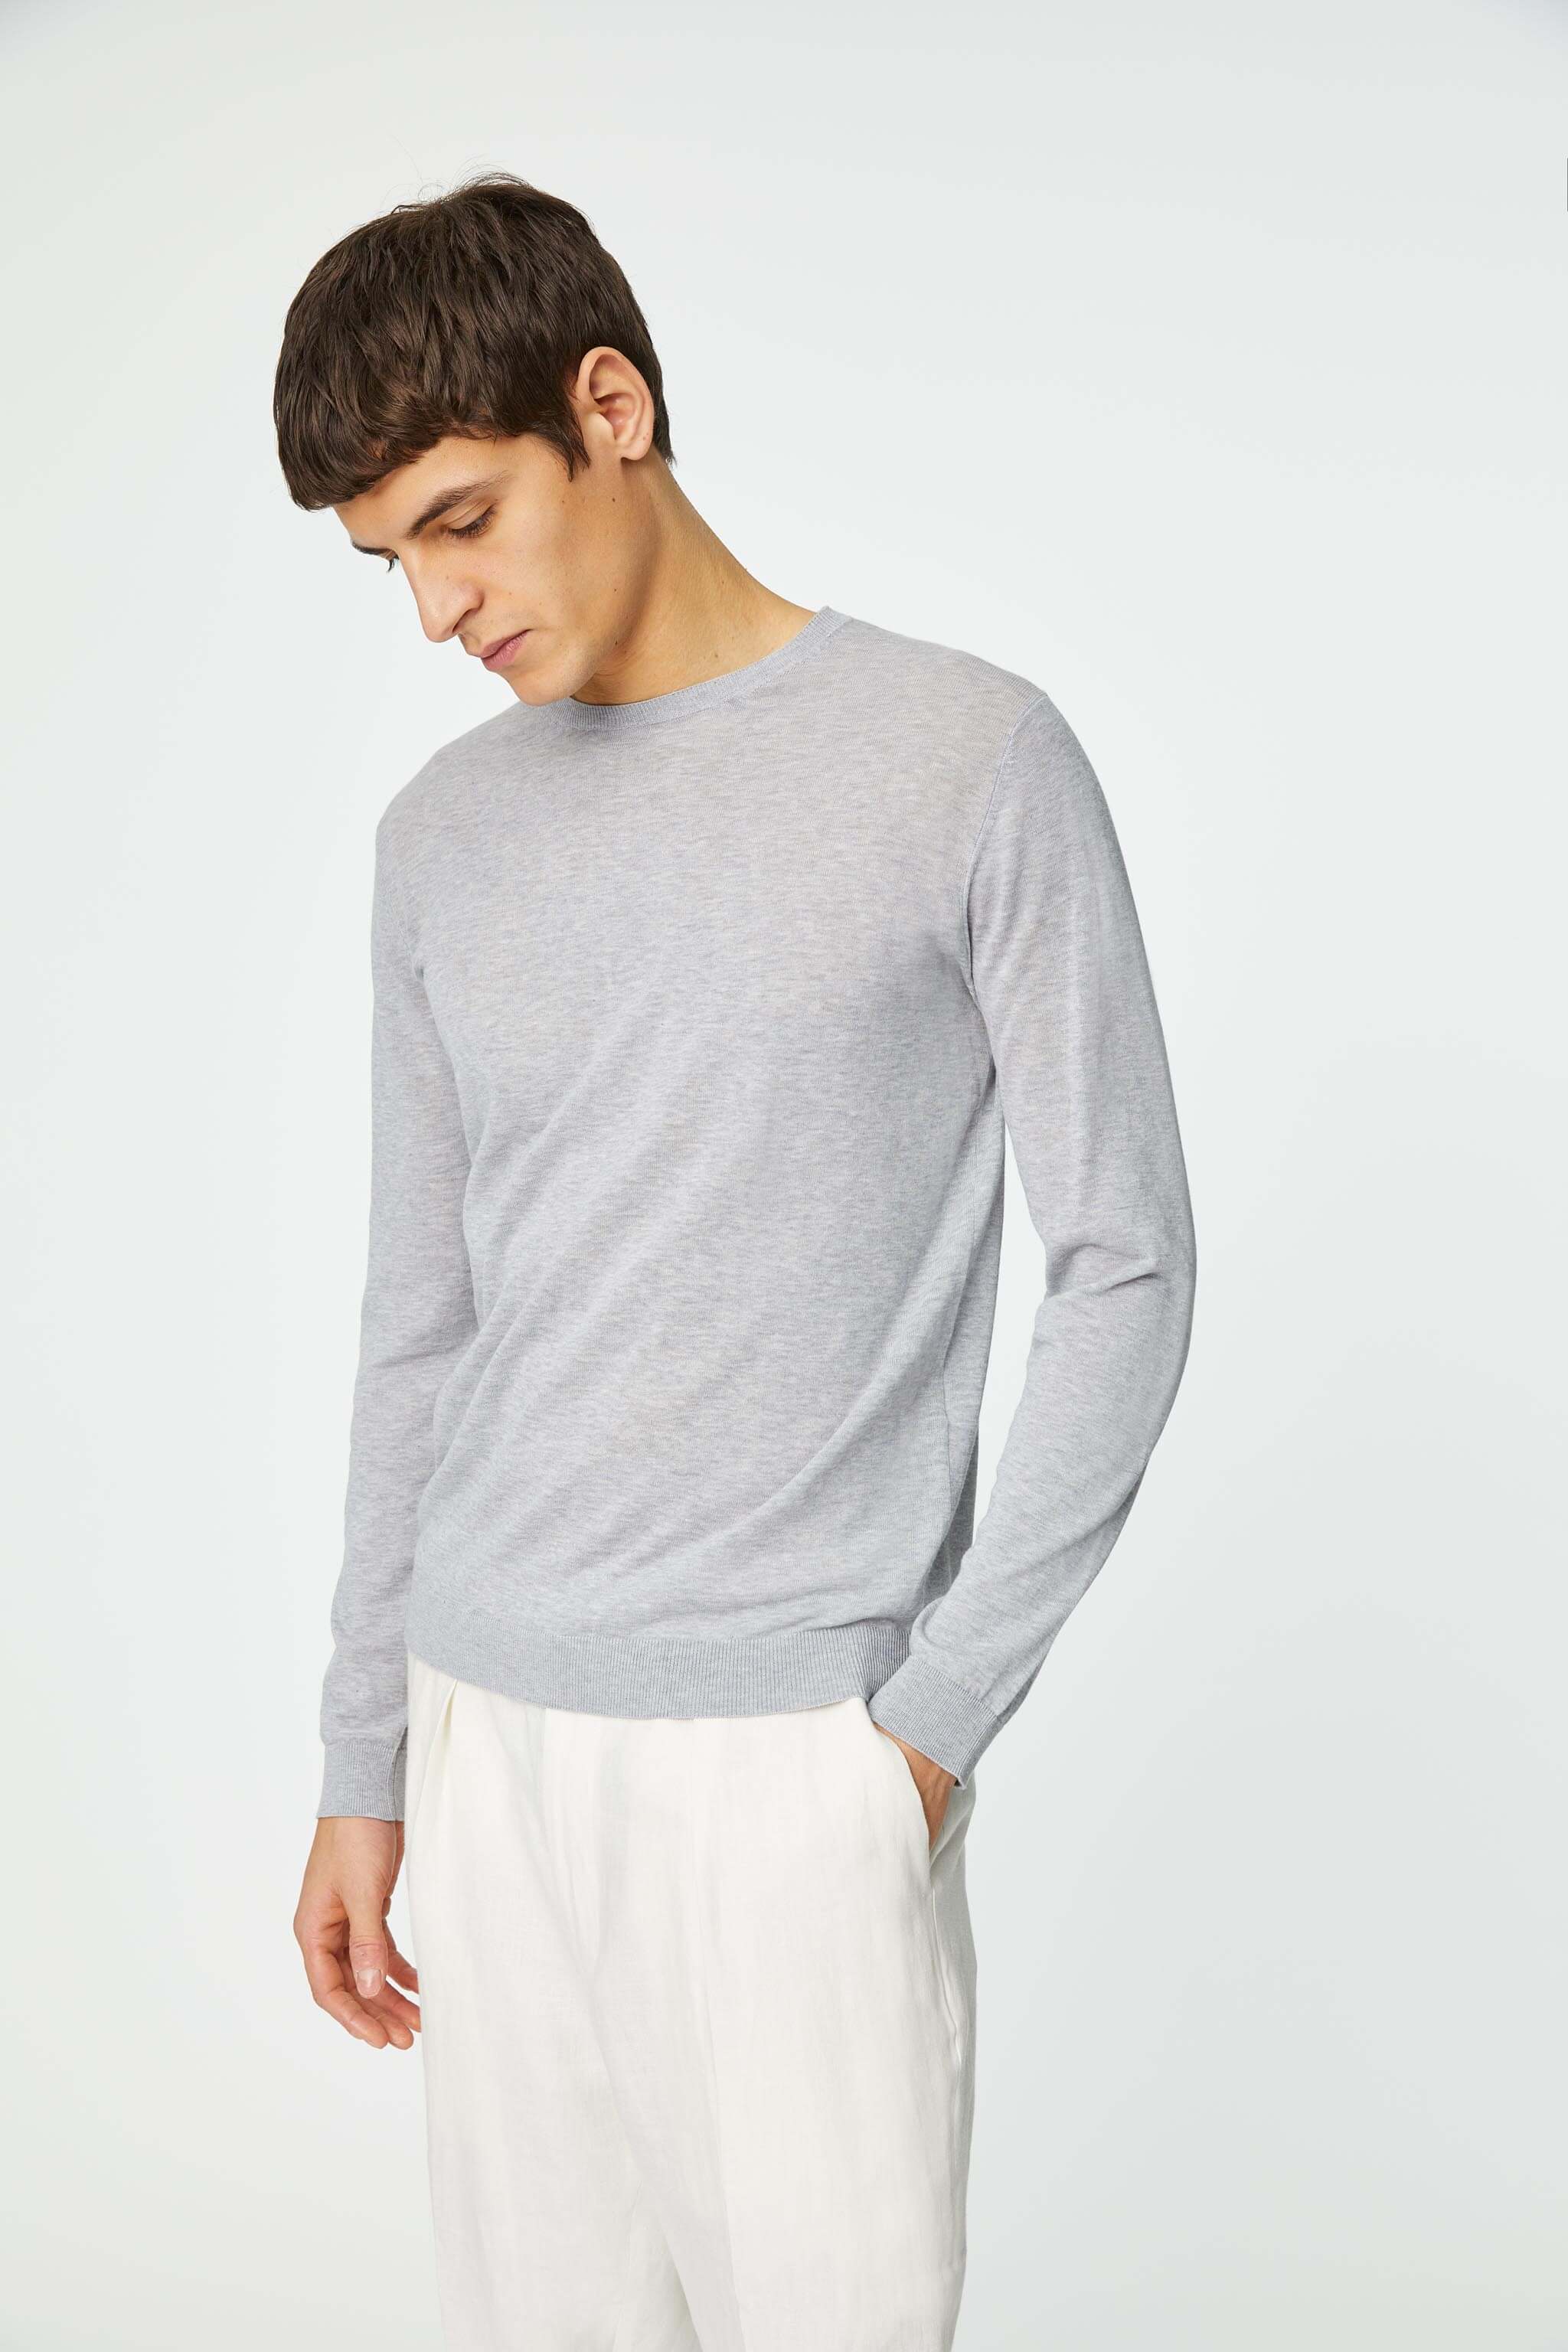 Long-sleeve cotton T-shirt in soft gray